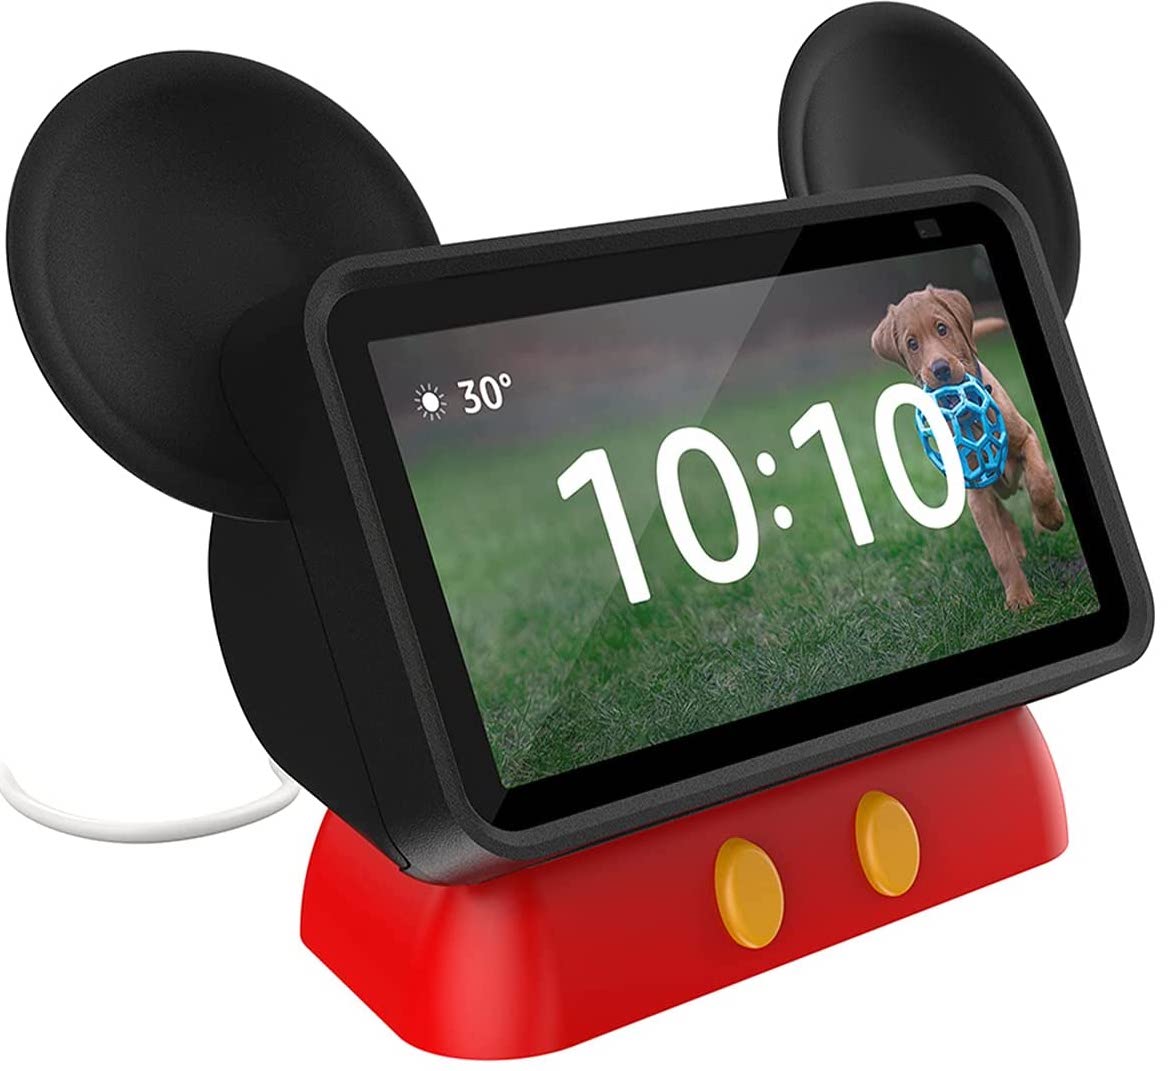 echo-show-mickey-mouse-stand-2-4576059